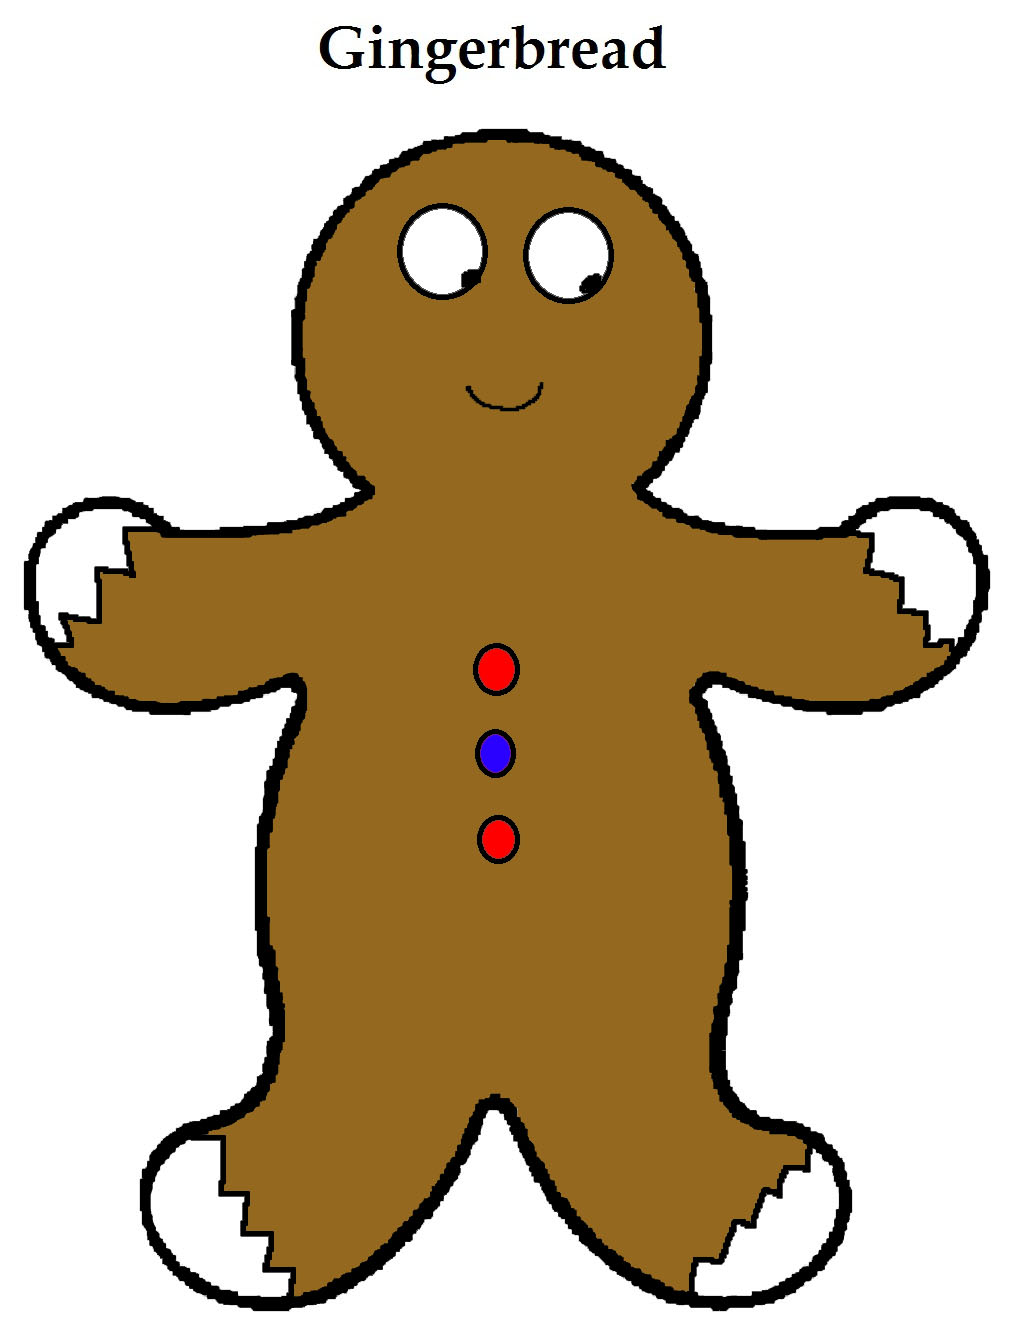 Free Gingerbread Christmas Doorknob Hangers For Kids in Sunday School or Children's Church By Church House Collection- Printable Cutout Template Gingerbread Man 